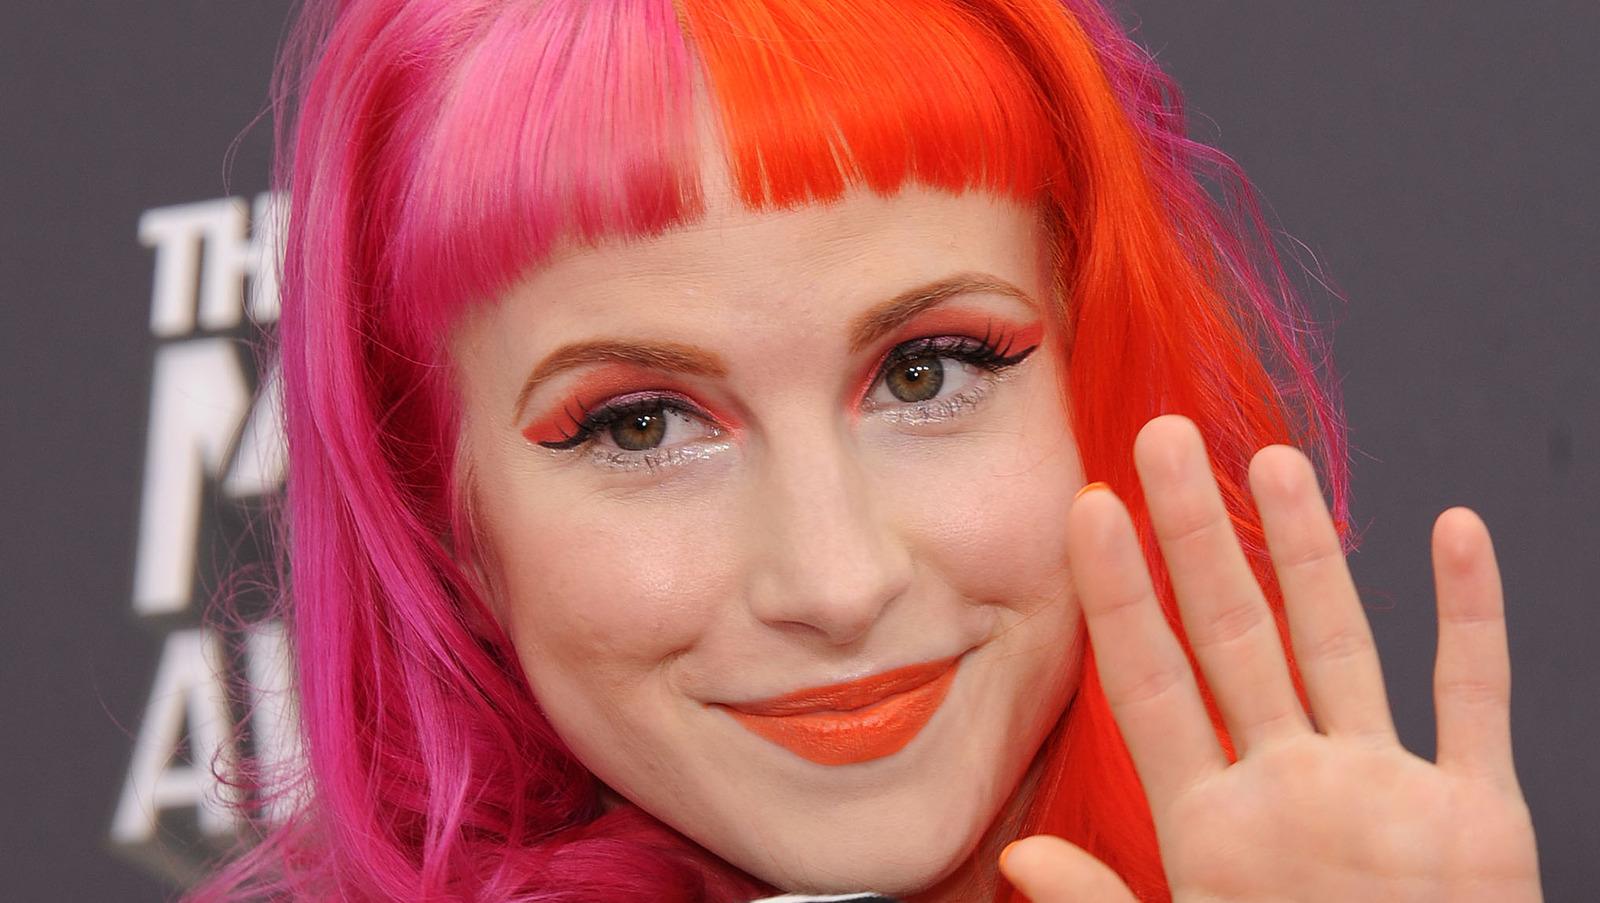 Hayley Williams' Hair Color: The Story Behind Her Iconic Orange and Blue Look - wide 6